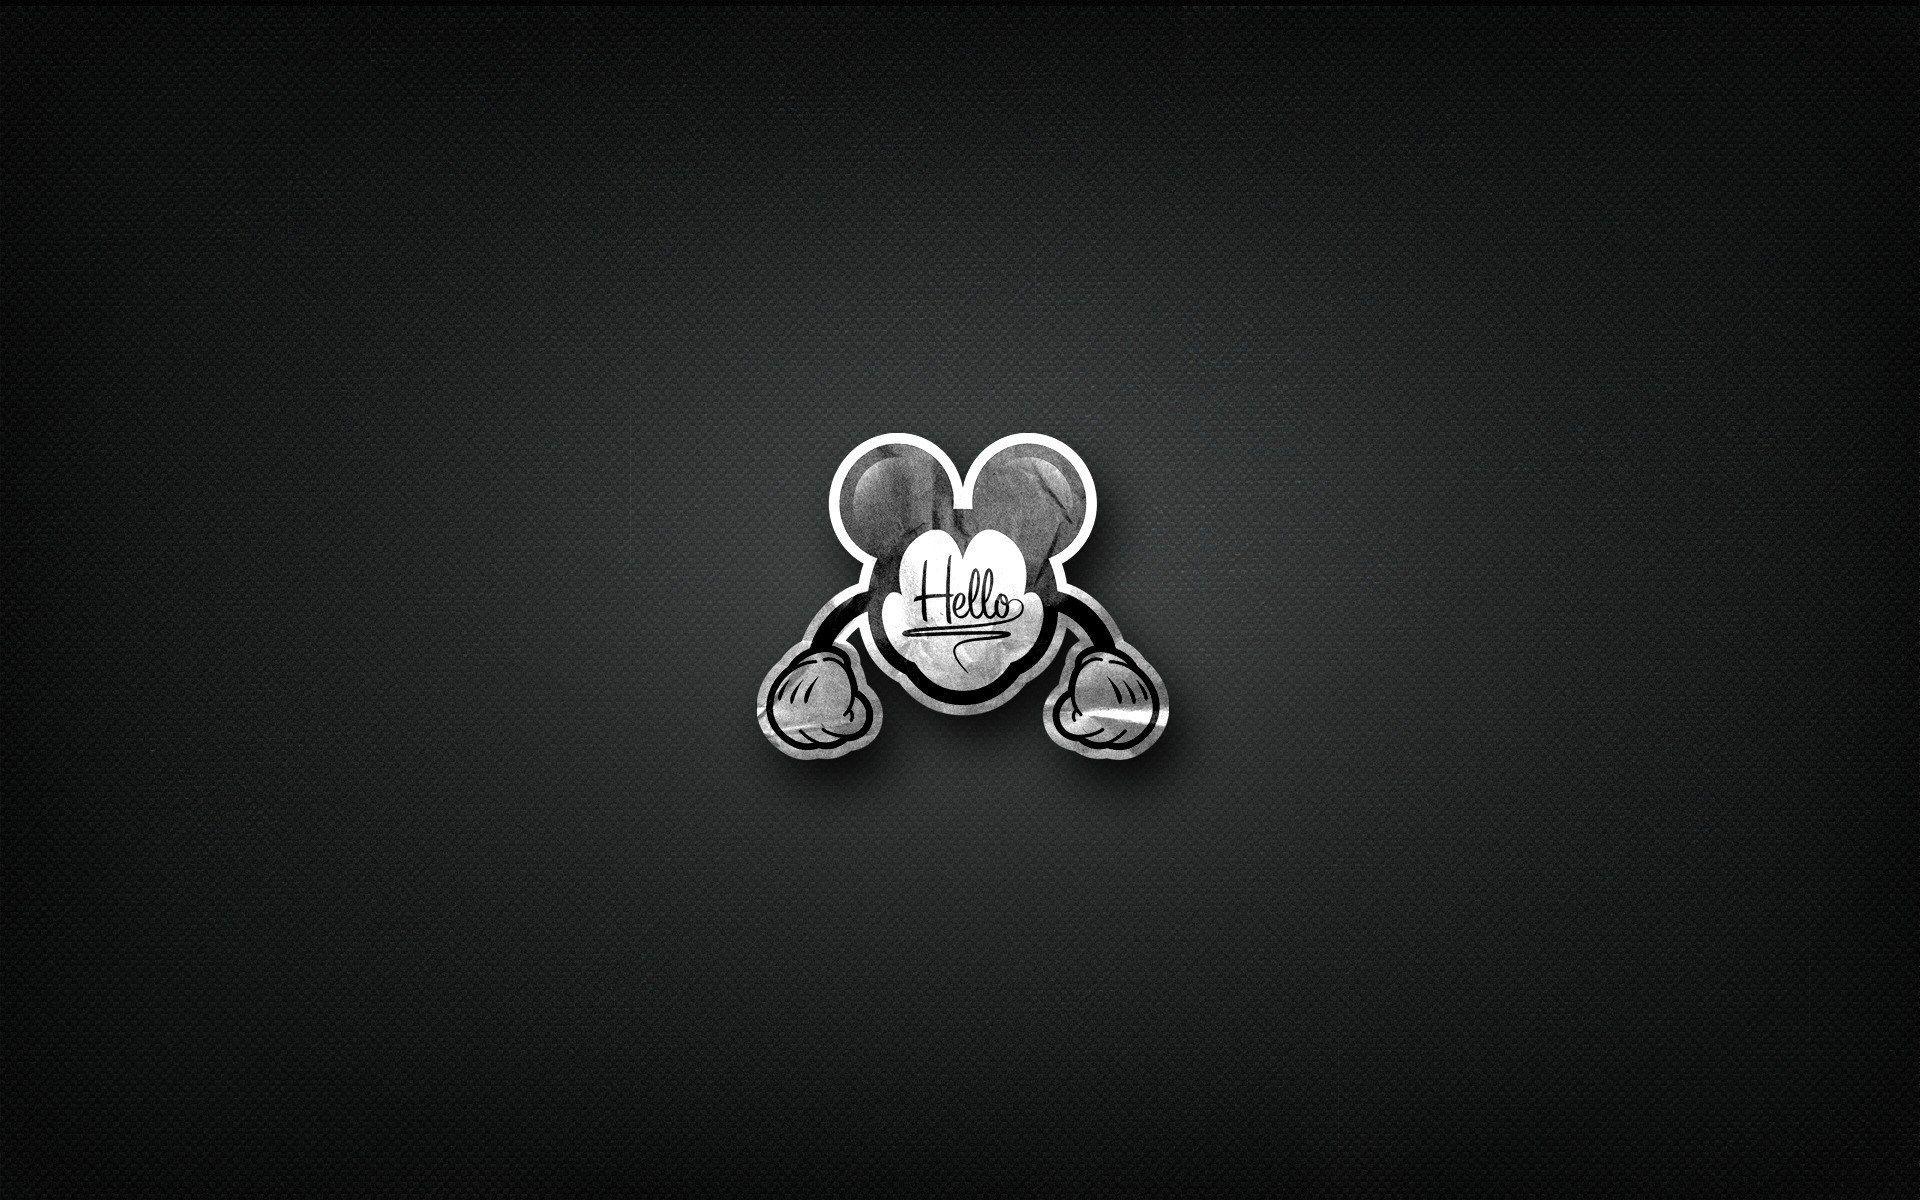 Mickey Mouse Black and White Wallpapers - Top Free Mickey Mouse Black